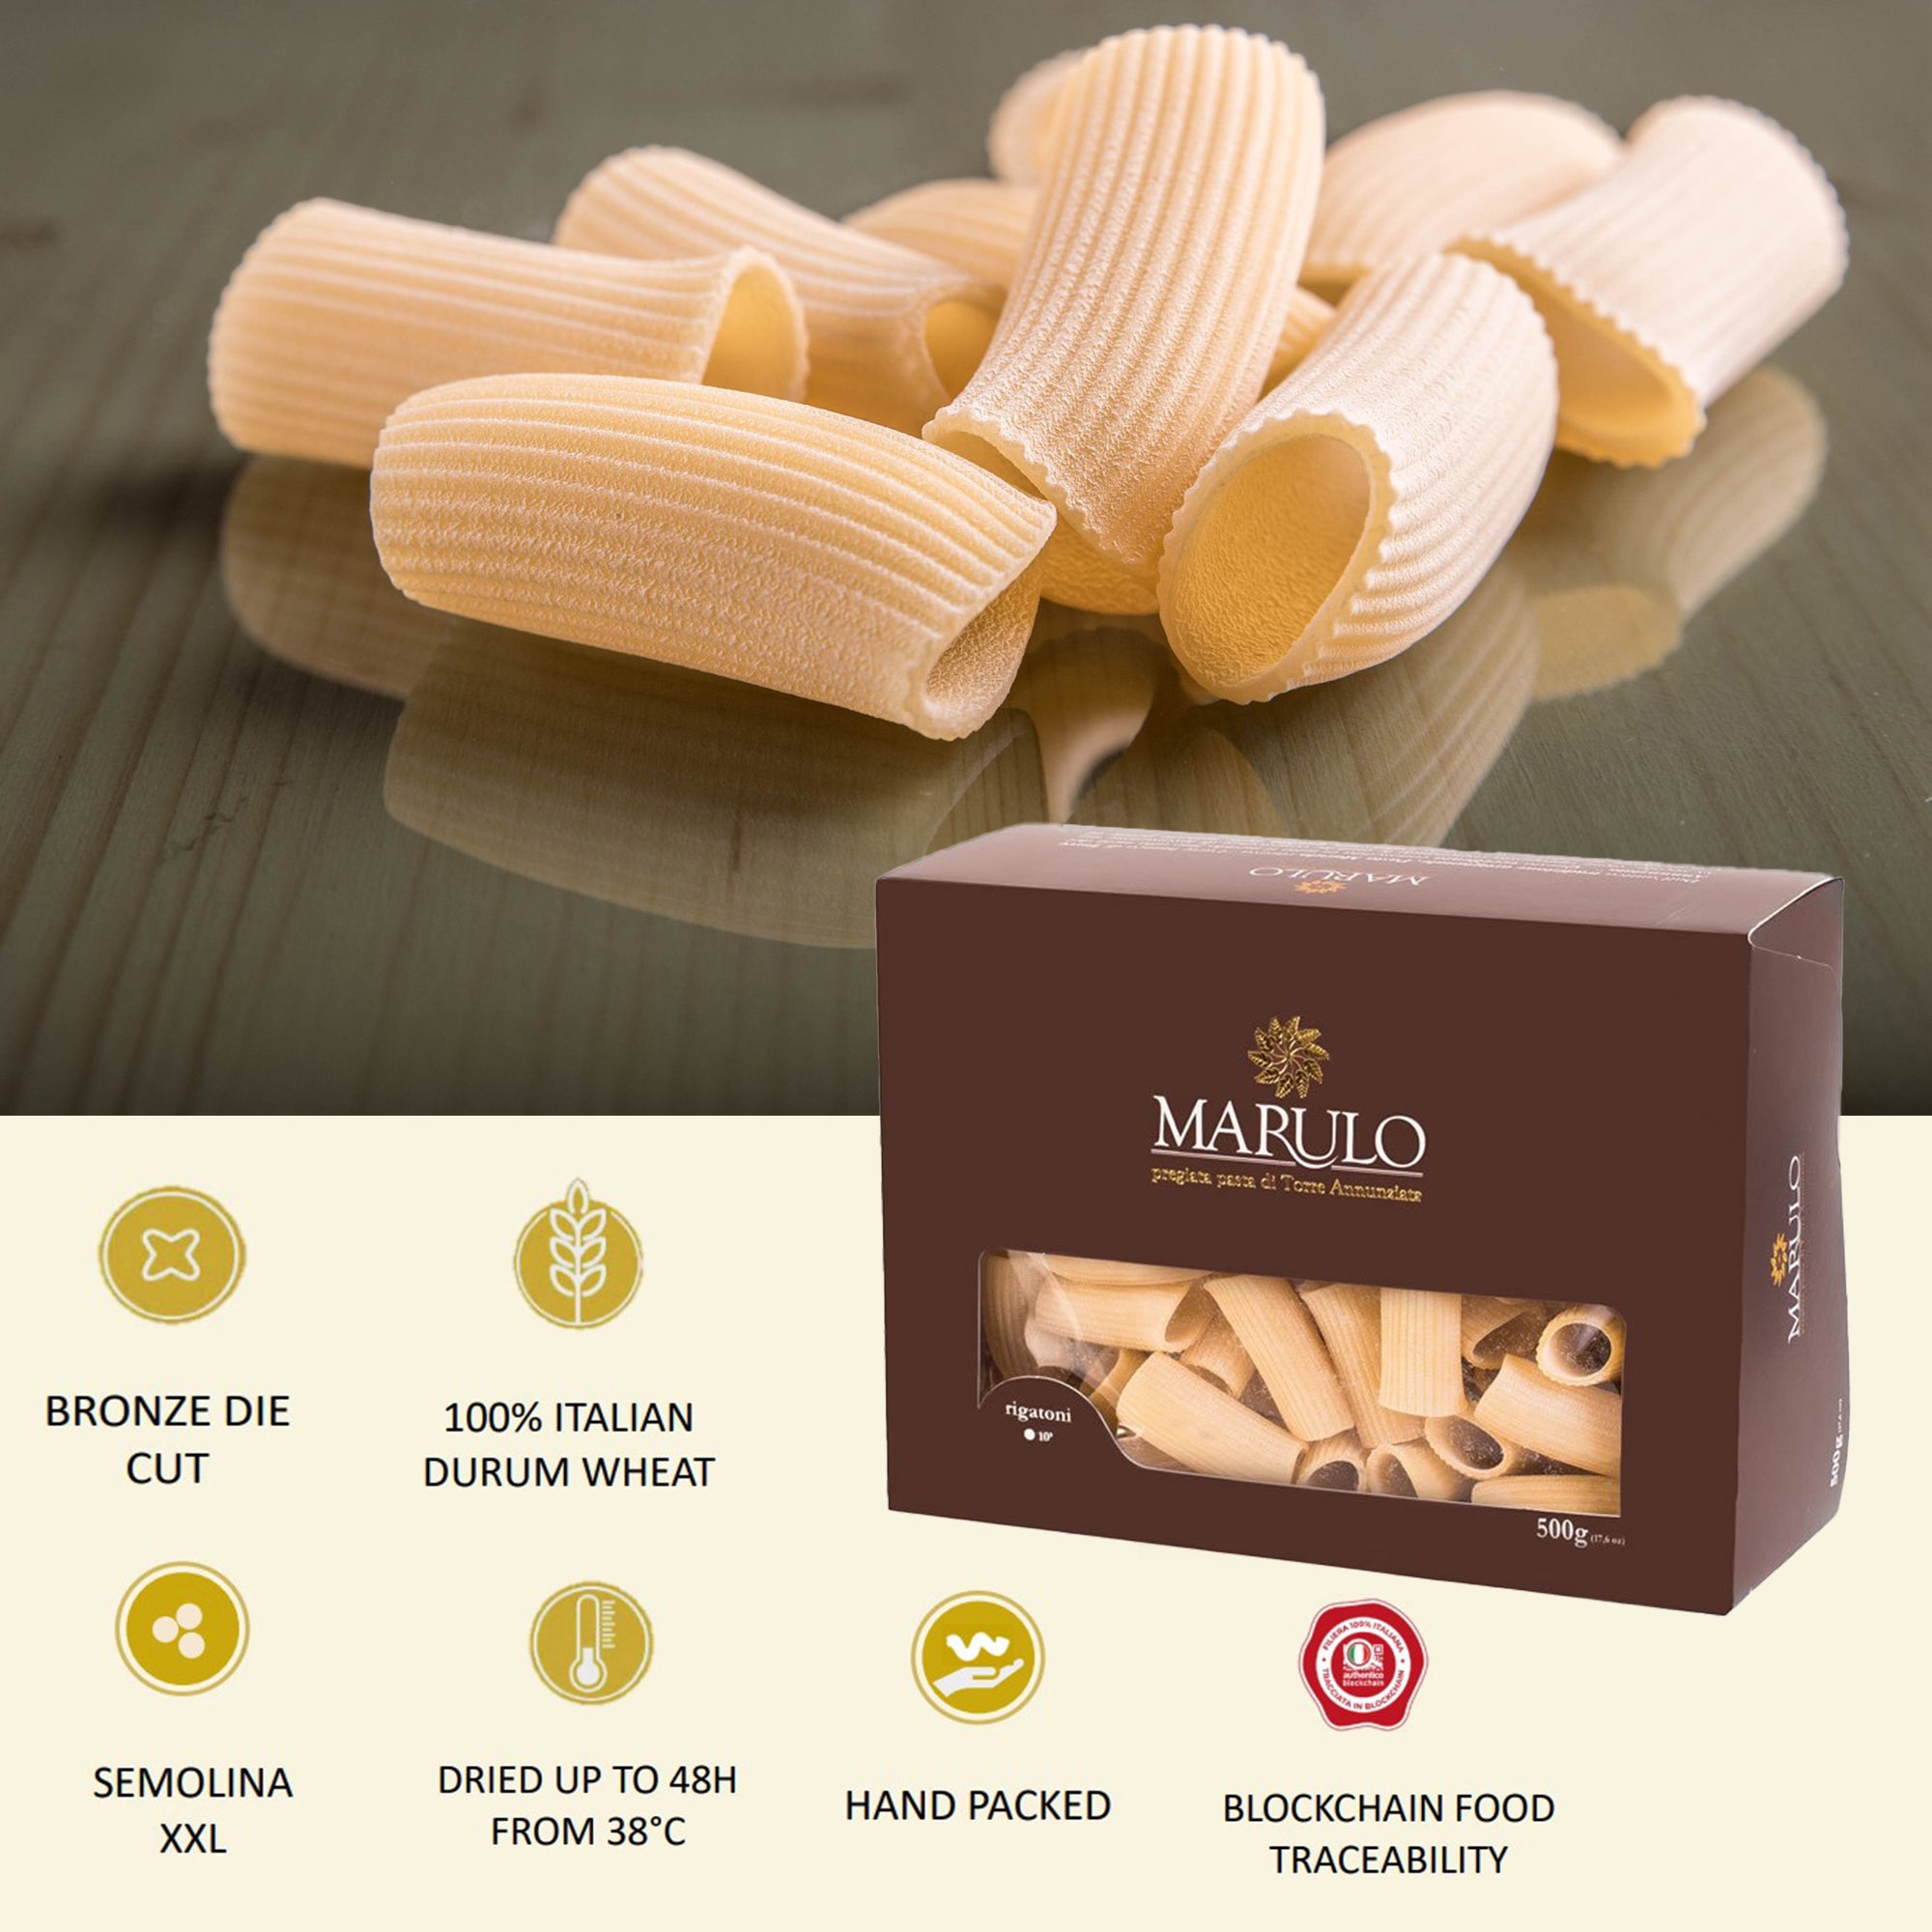 ourmet Marulo Rigatoni Homemade Artisan Pasta for a restaurant quality meal.  Homemade Artisan Pasta from Italy.